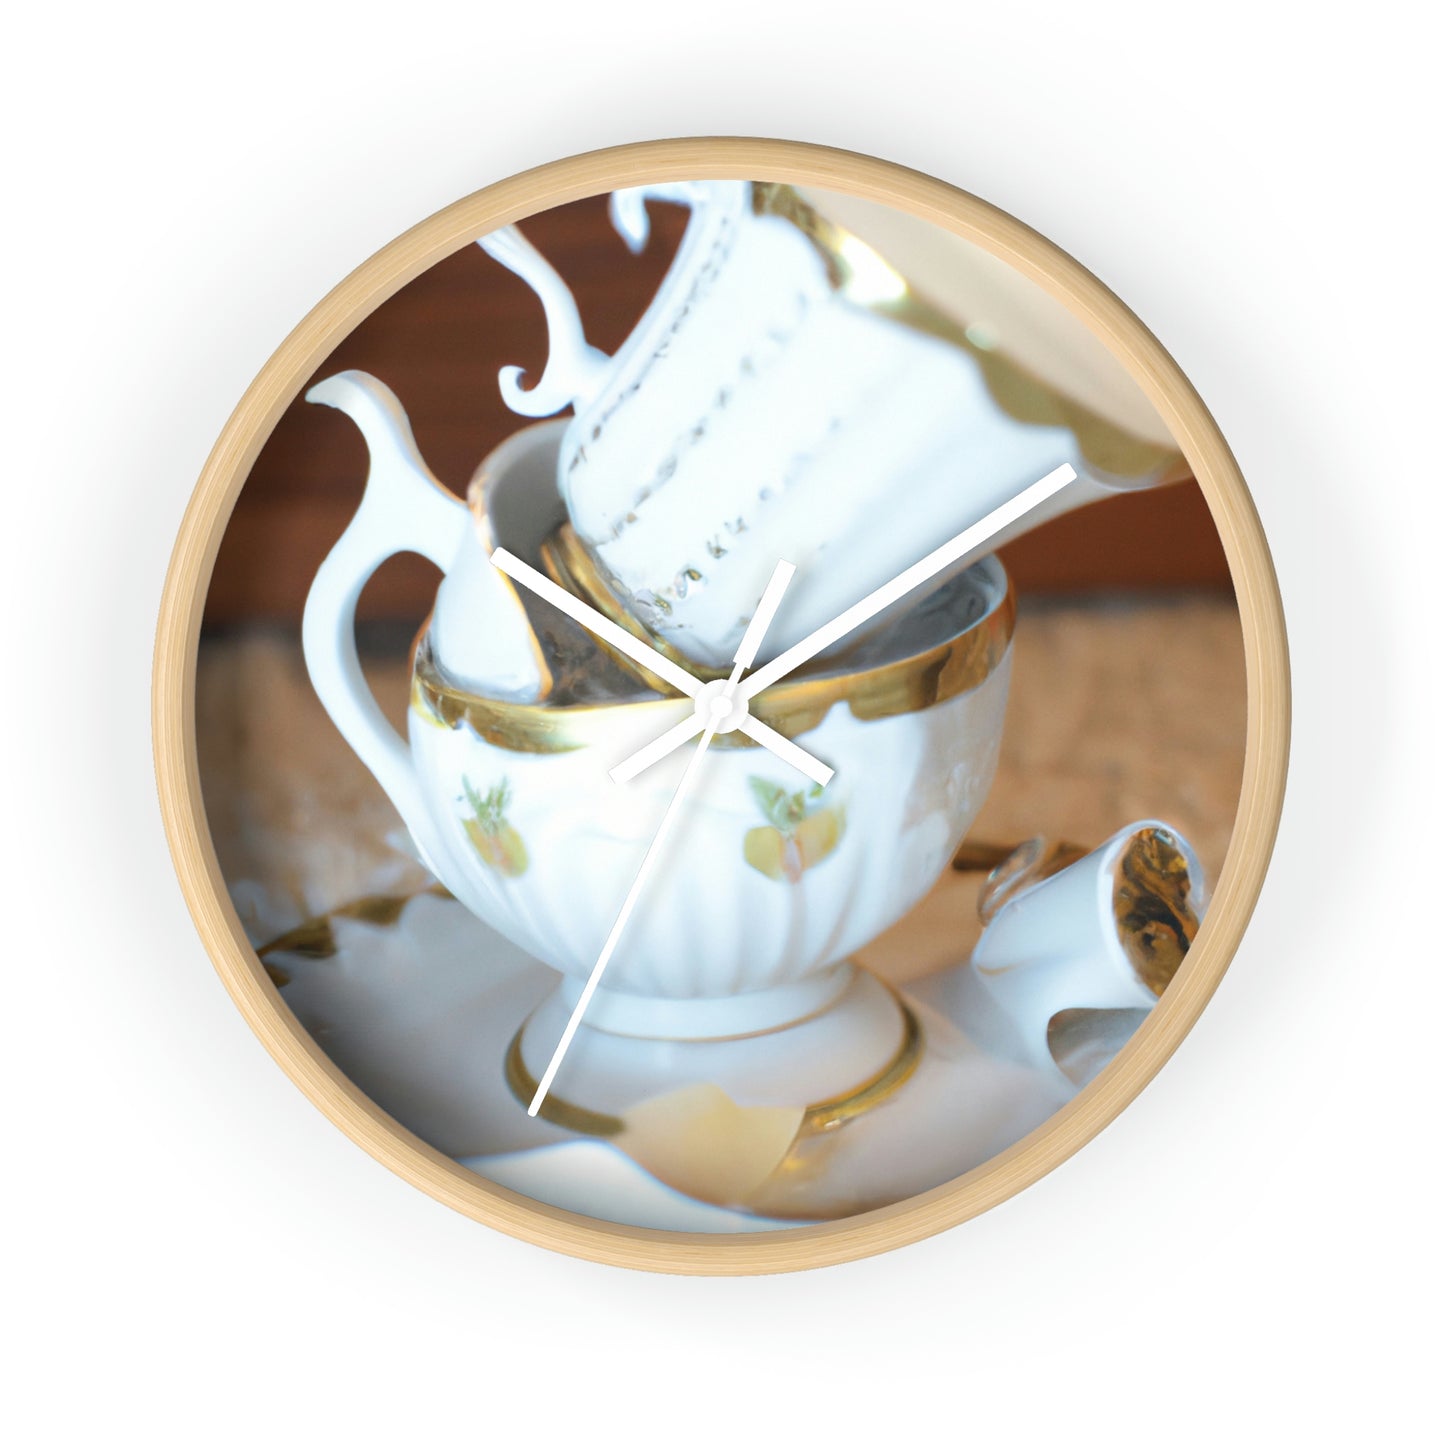 "A Cup of Comfort" - The Alien Wall Clock